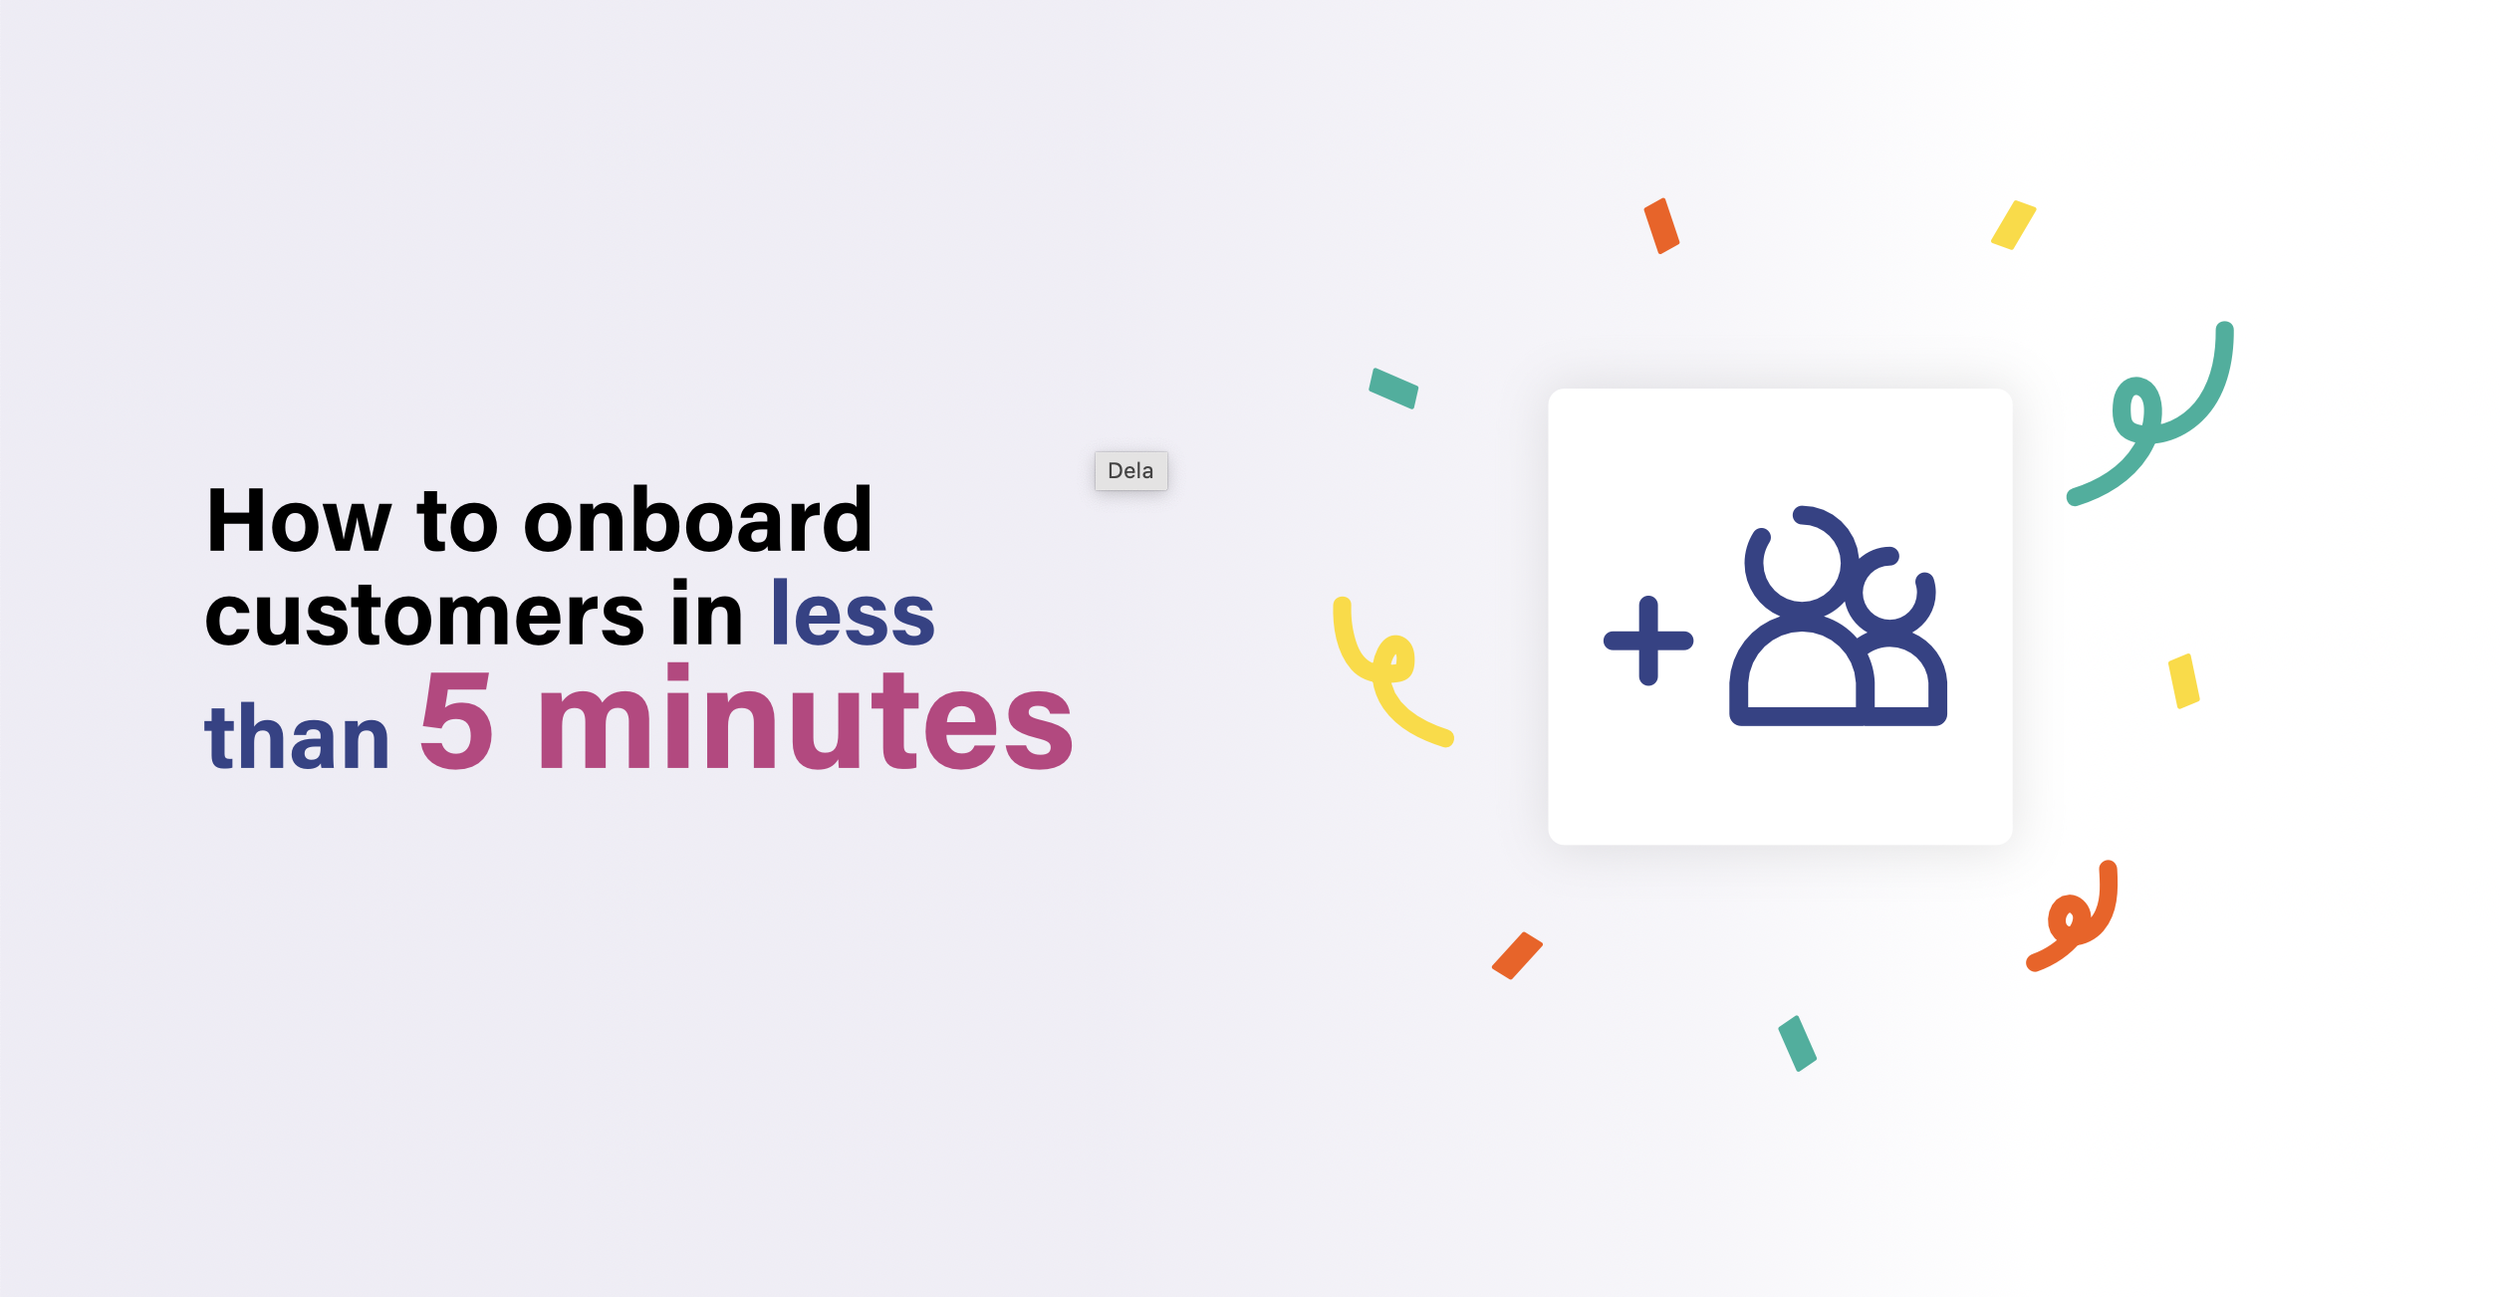 How to onboard customers in less than 5 minutes